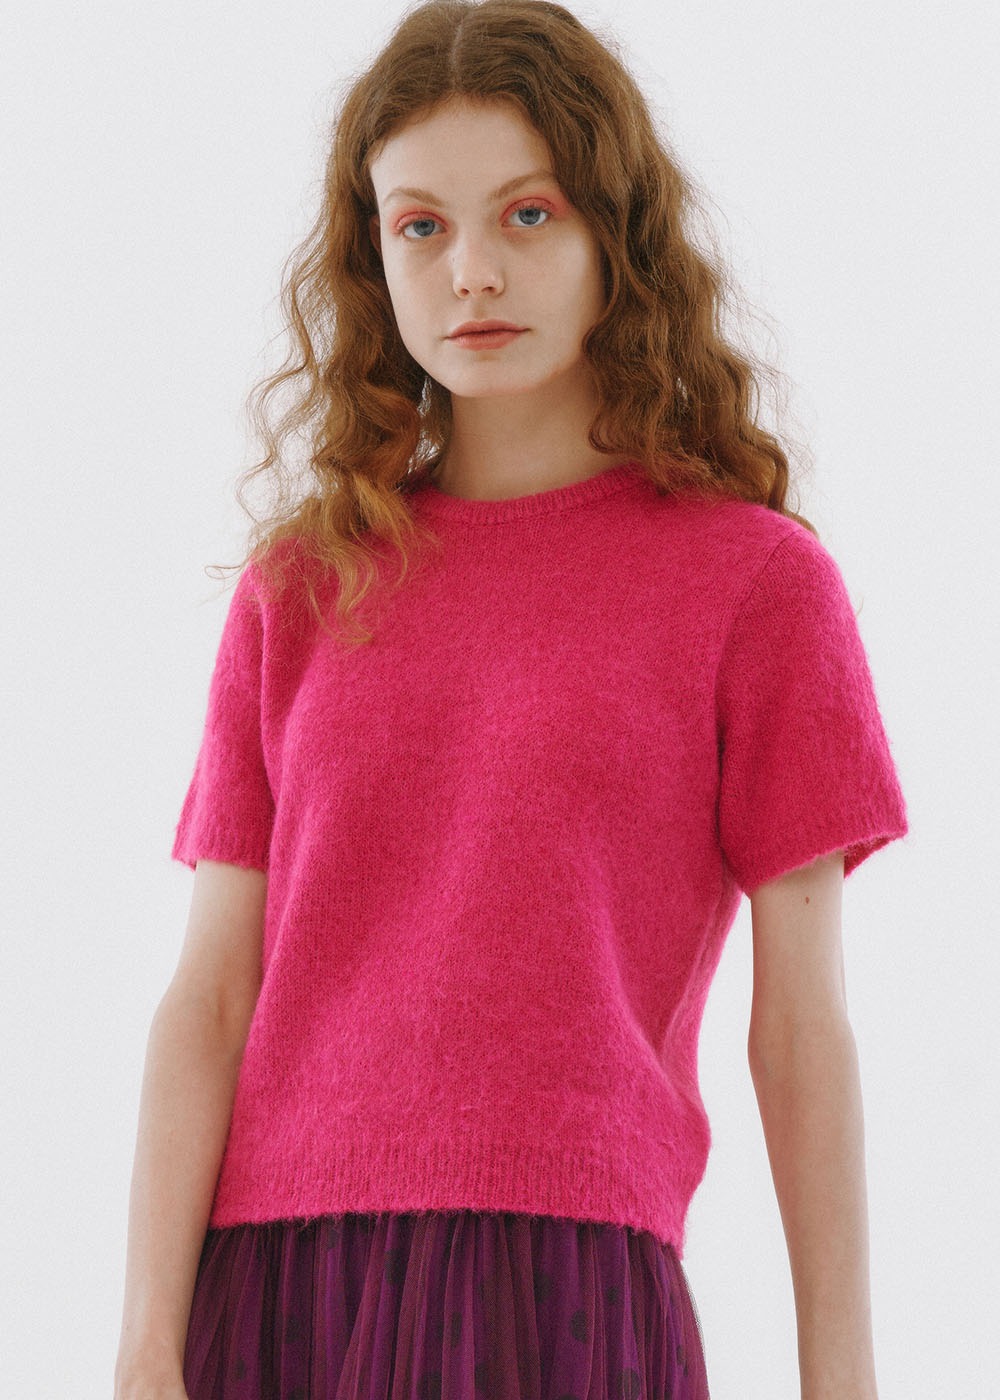 Mohair Fuzzy Knit Top [TURE PINK]Mohair Fuzzy Knit Top [TURE PINK]로씨로씨